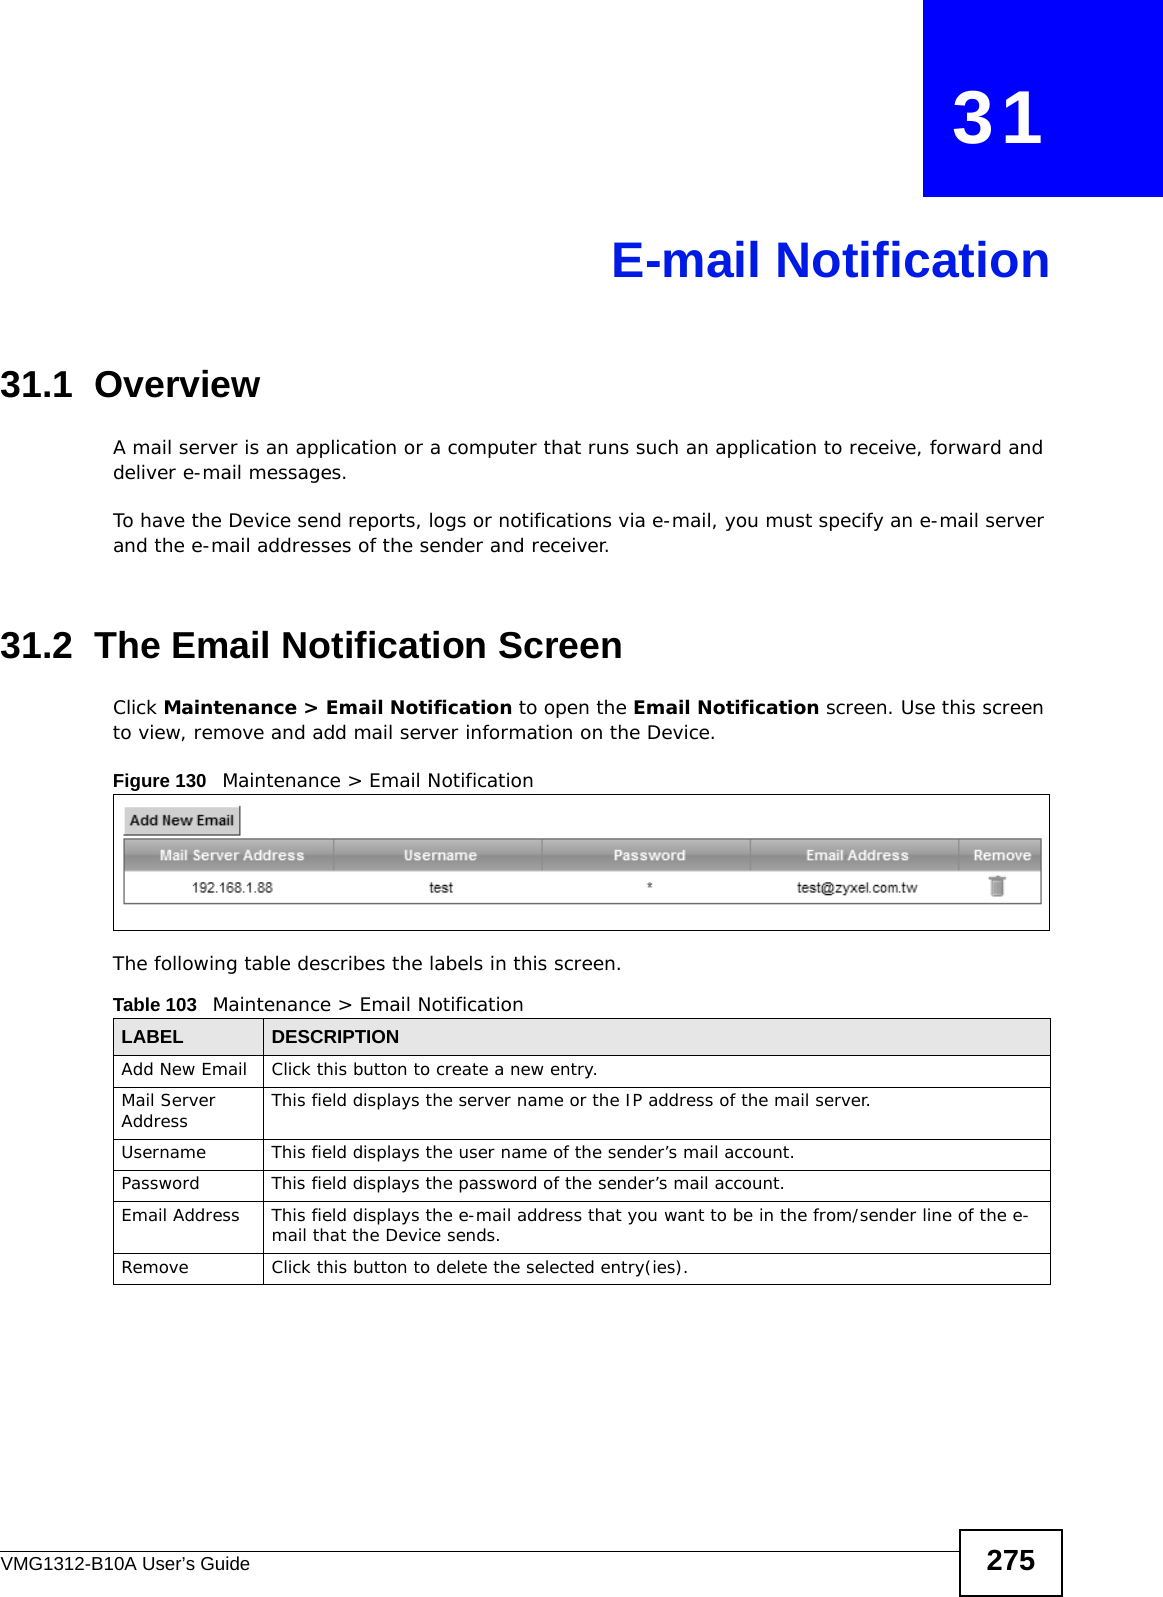 VMG1312-B10A User’s Guide 275CHAPTER   31E-mail Notification31.1  Overview   A mail server is an application or a computer that runs such an application to receive, forward and deliver e-mail messages.To have the Device send reports, logs or notifications via e-mail, you must specify an e-mail server and the e-mail addresses of the sender and receiver.31.2  The Email Notification ScreenClick Maintenance &gt; Email Notification to open the Email Notification screen. Use this screen to view, remove and add mail server information on the Device.Figure 130   Maintenance &gt; Email Notification The following table describes the labels in this screen. Table 103   Maintenance &gt; Email NotificationLABEL DESCRIPTIONAdd New Email Click this button to create a new entry.Mail Server Address This field displays the server name or the IP address of the mail server.Username     This field displays the user name of the sender’s mail account.Password This field displays the password of the sender’s mail account.Email Address This field displays the e-mail address that you want to be in the from/sender line of the e-mail that the Device sends. Remove Click this button to delete the selected entry(ies).